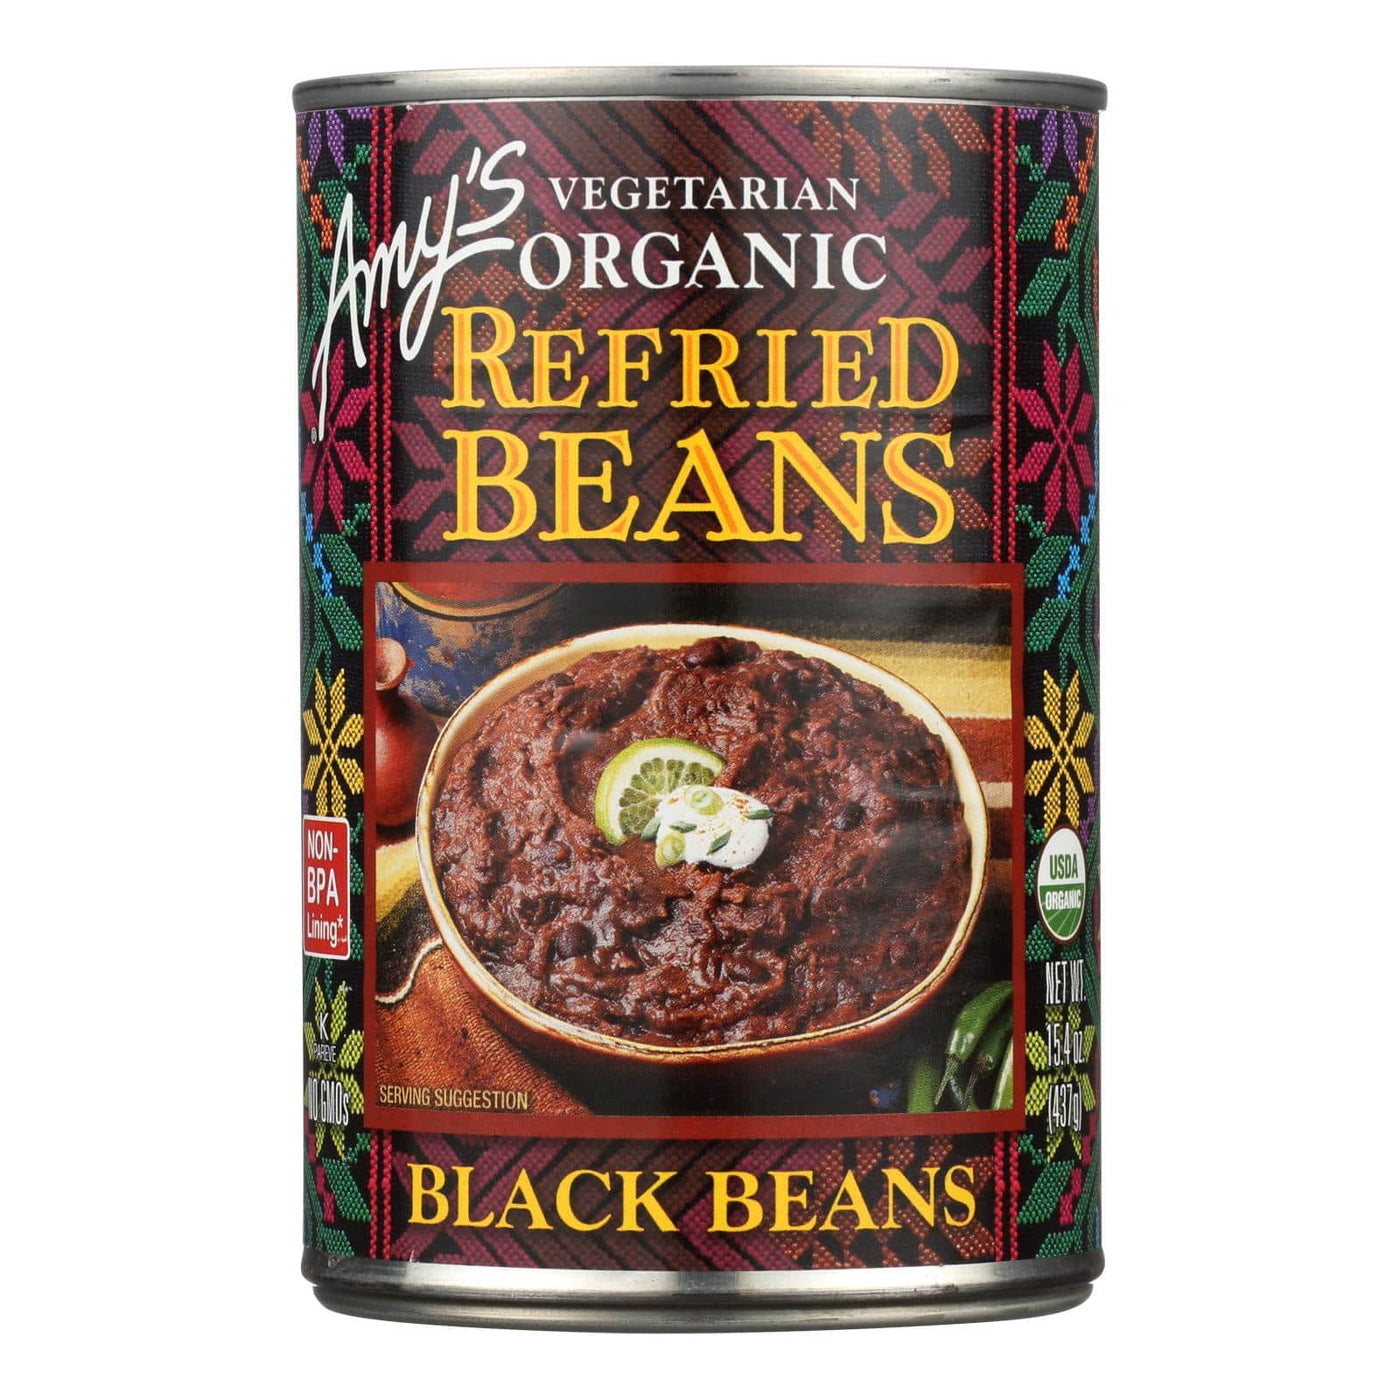 Buy Amy's - Organic Refried Black Beans - Case Of 12 - 15.4 Oz.  at OnlyNaturals.us